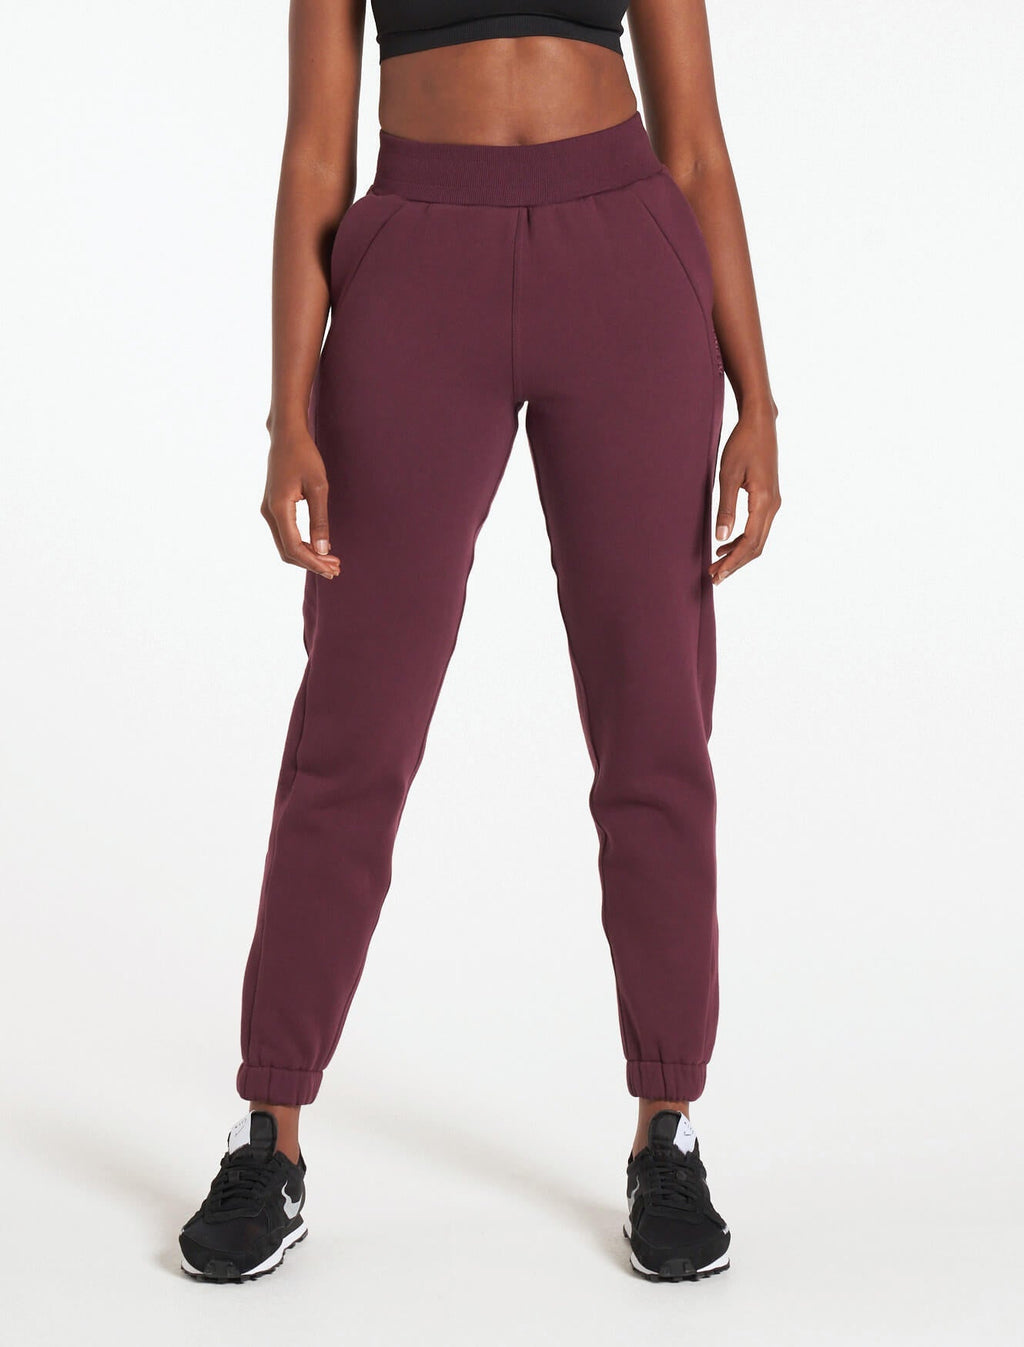 products/womens-select-bottoms-black-cherry.jpg